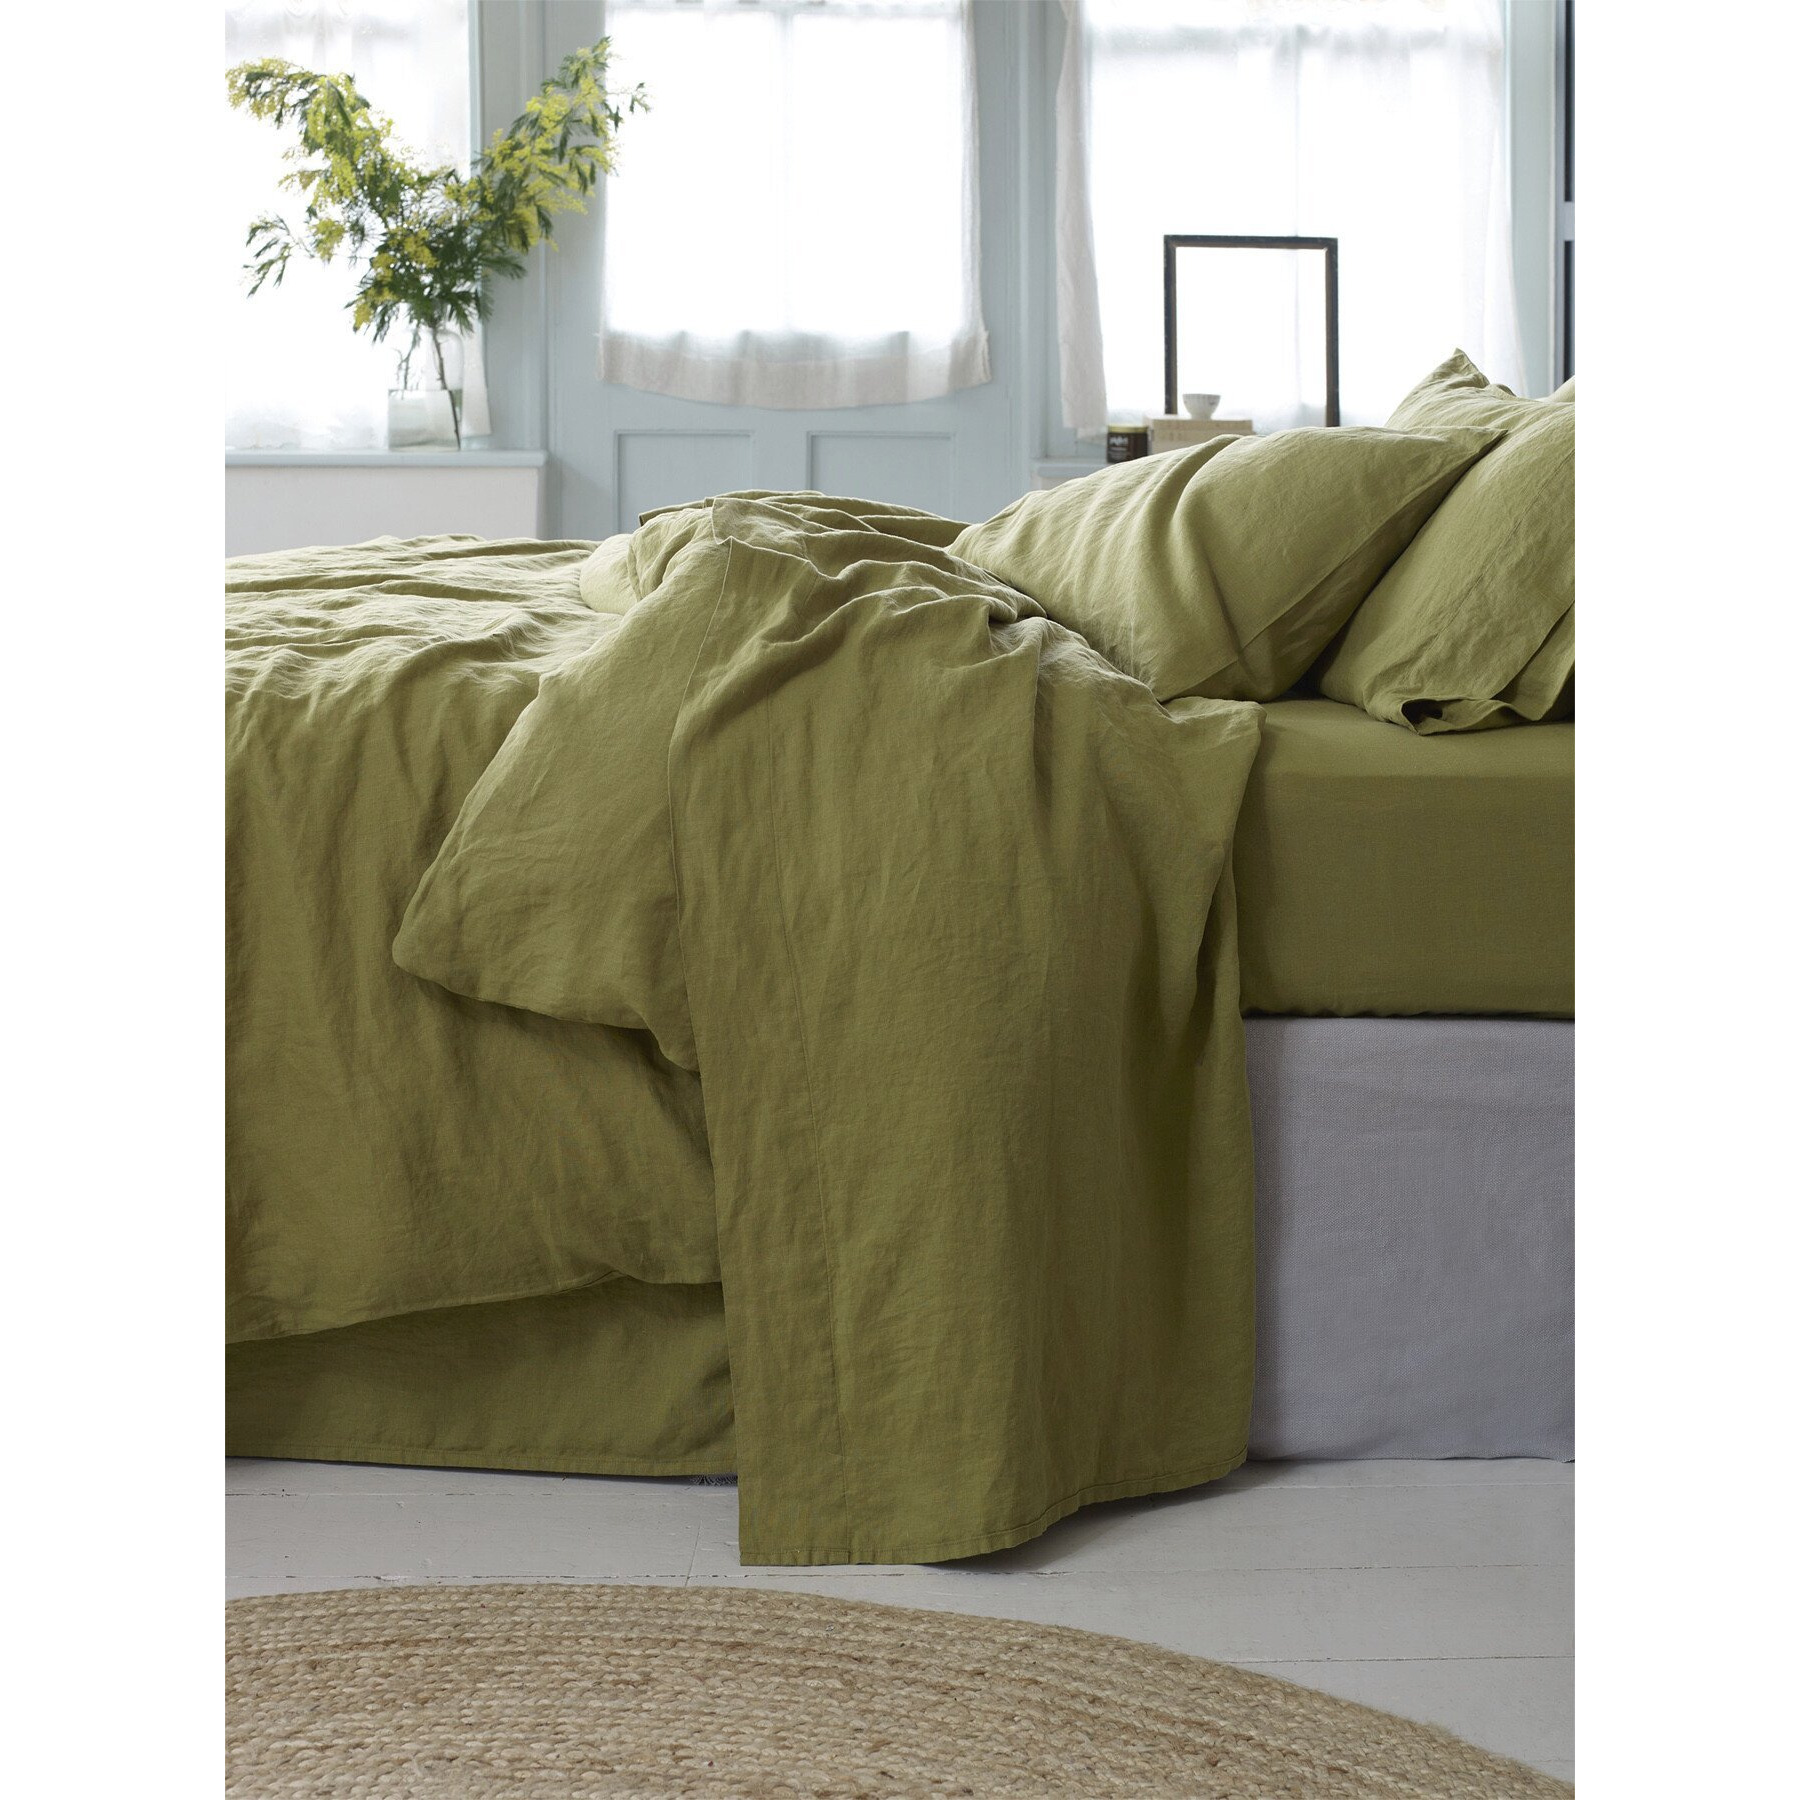 Piglet in Bed Linen Flat Sheet - Size King Green - image 1